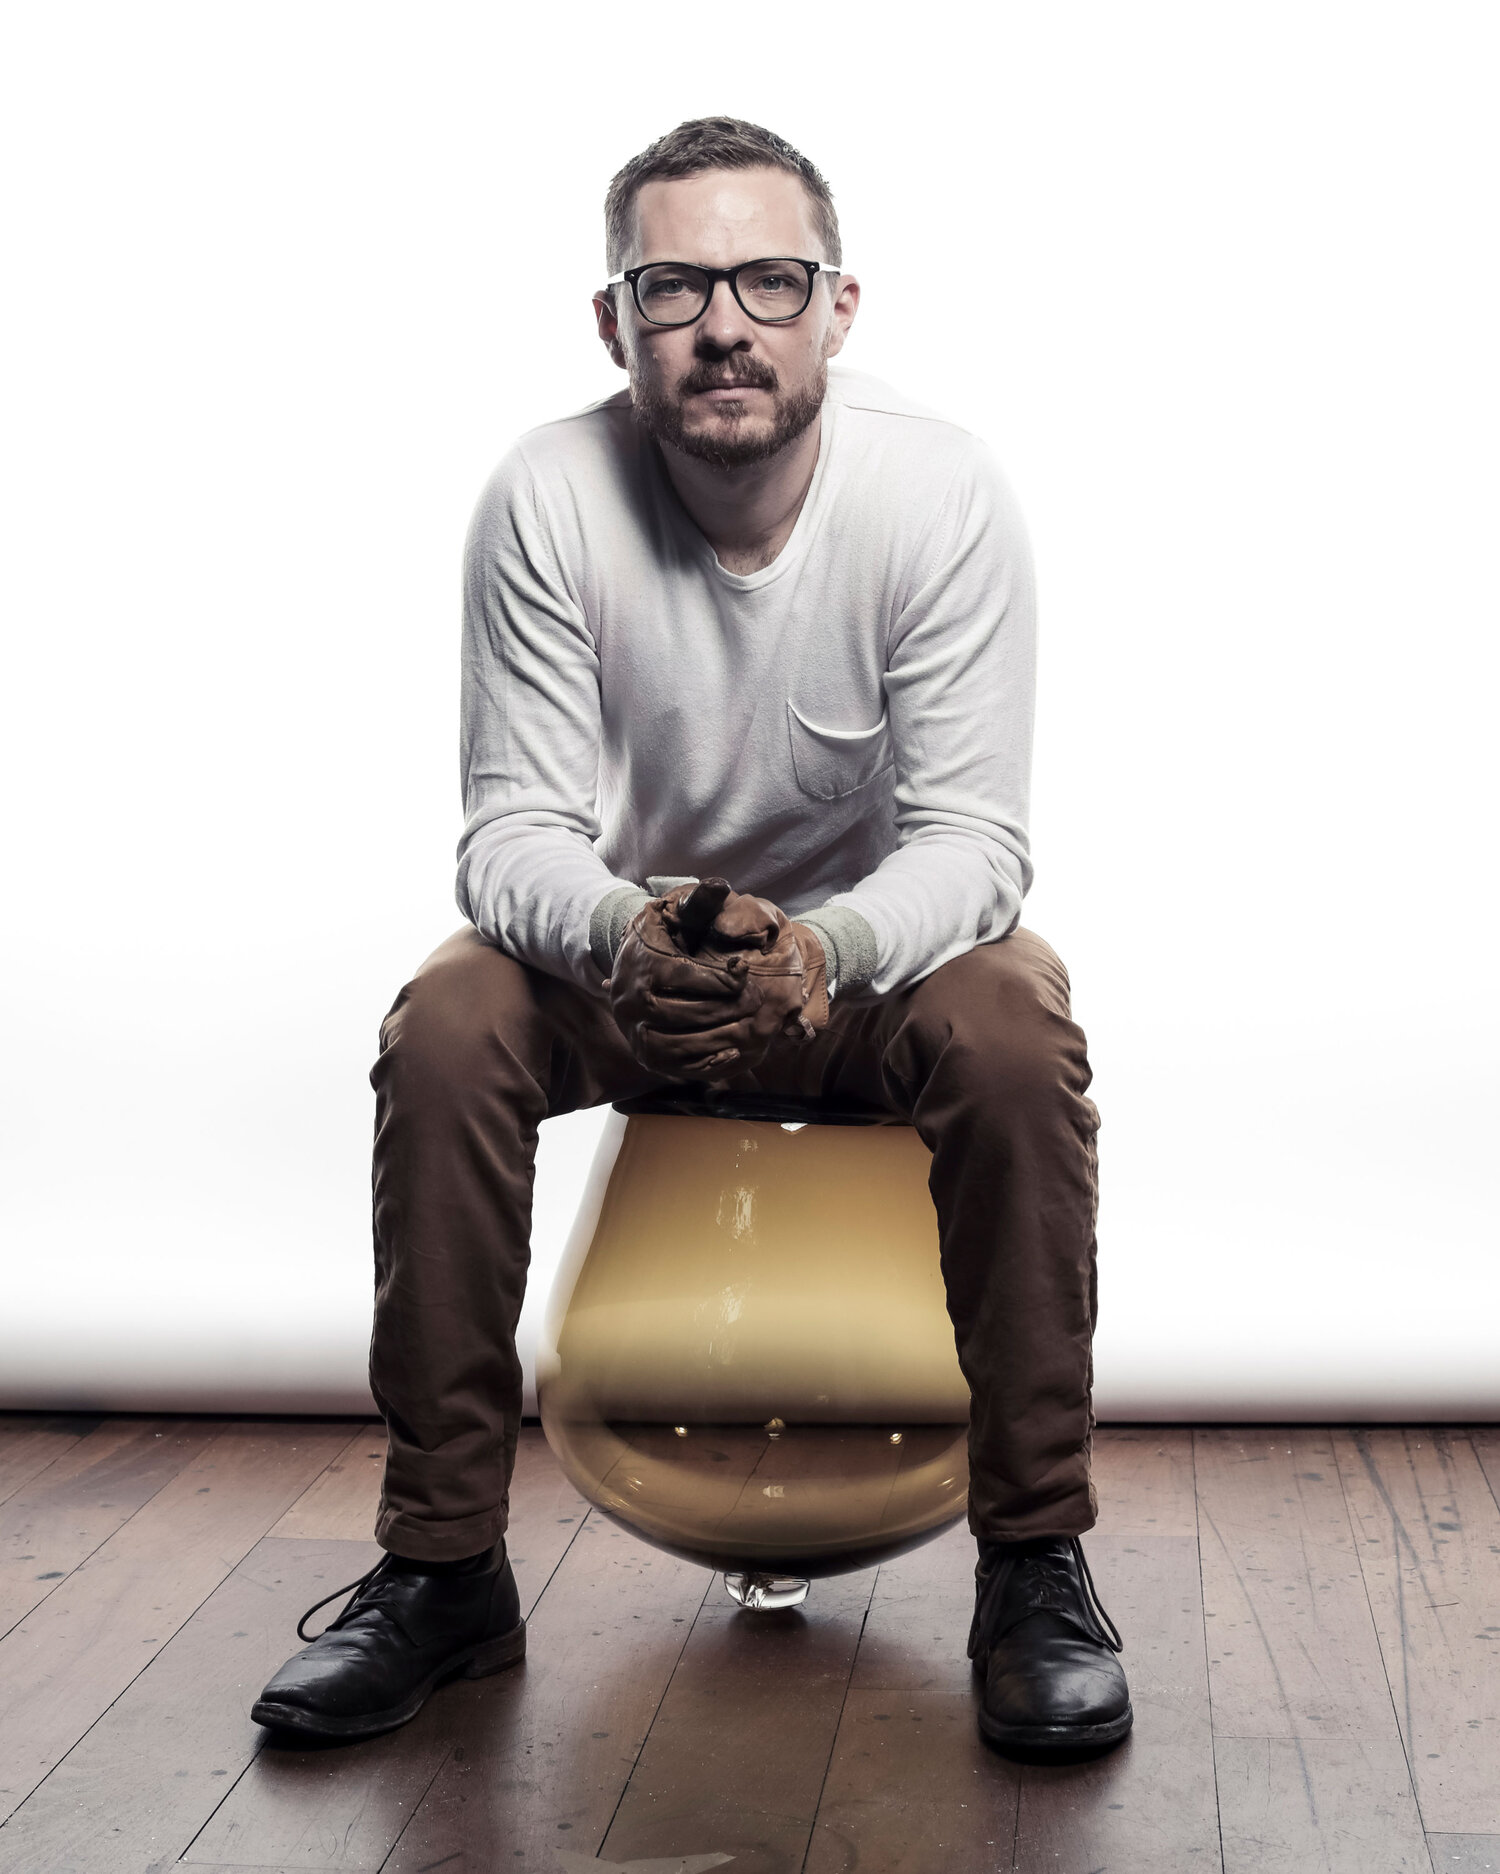 Man in glasses perched on a glass modern stool while he looks at camera.